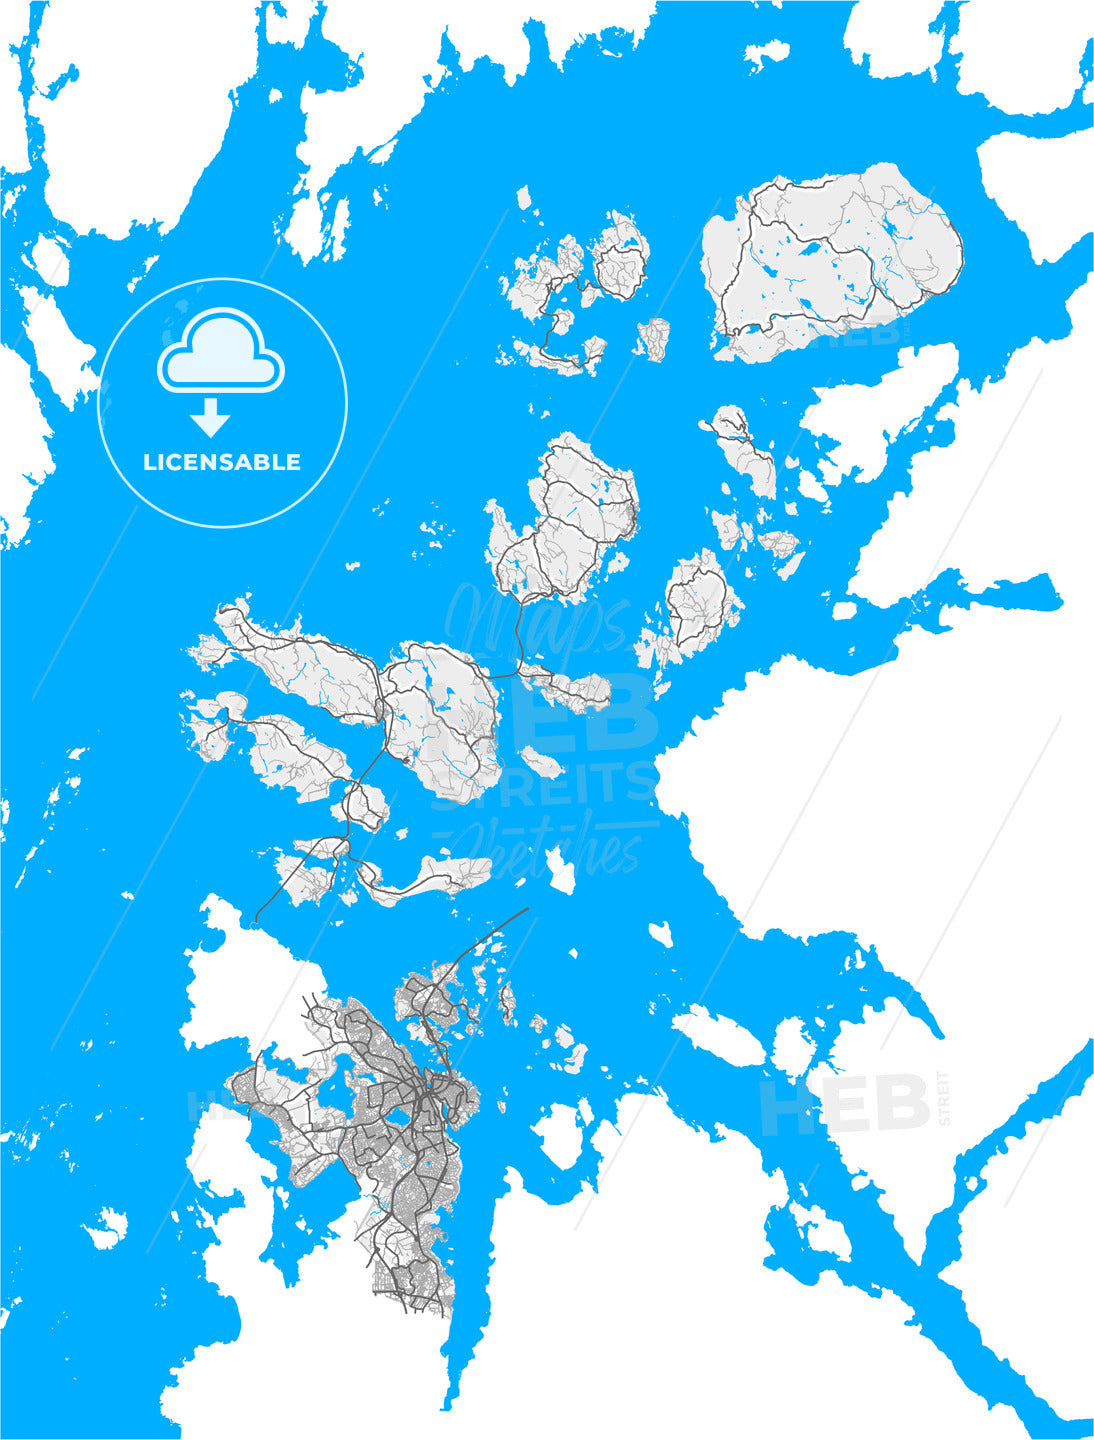 Stavanger, Rogaland, Norway, high quality vector map